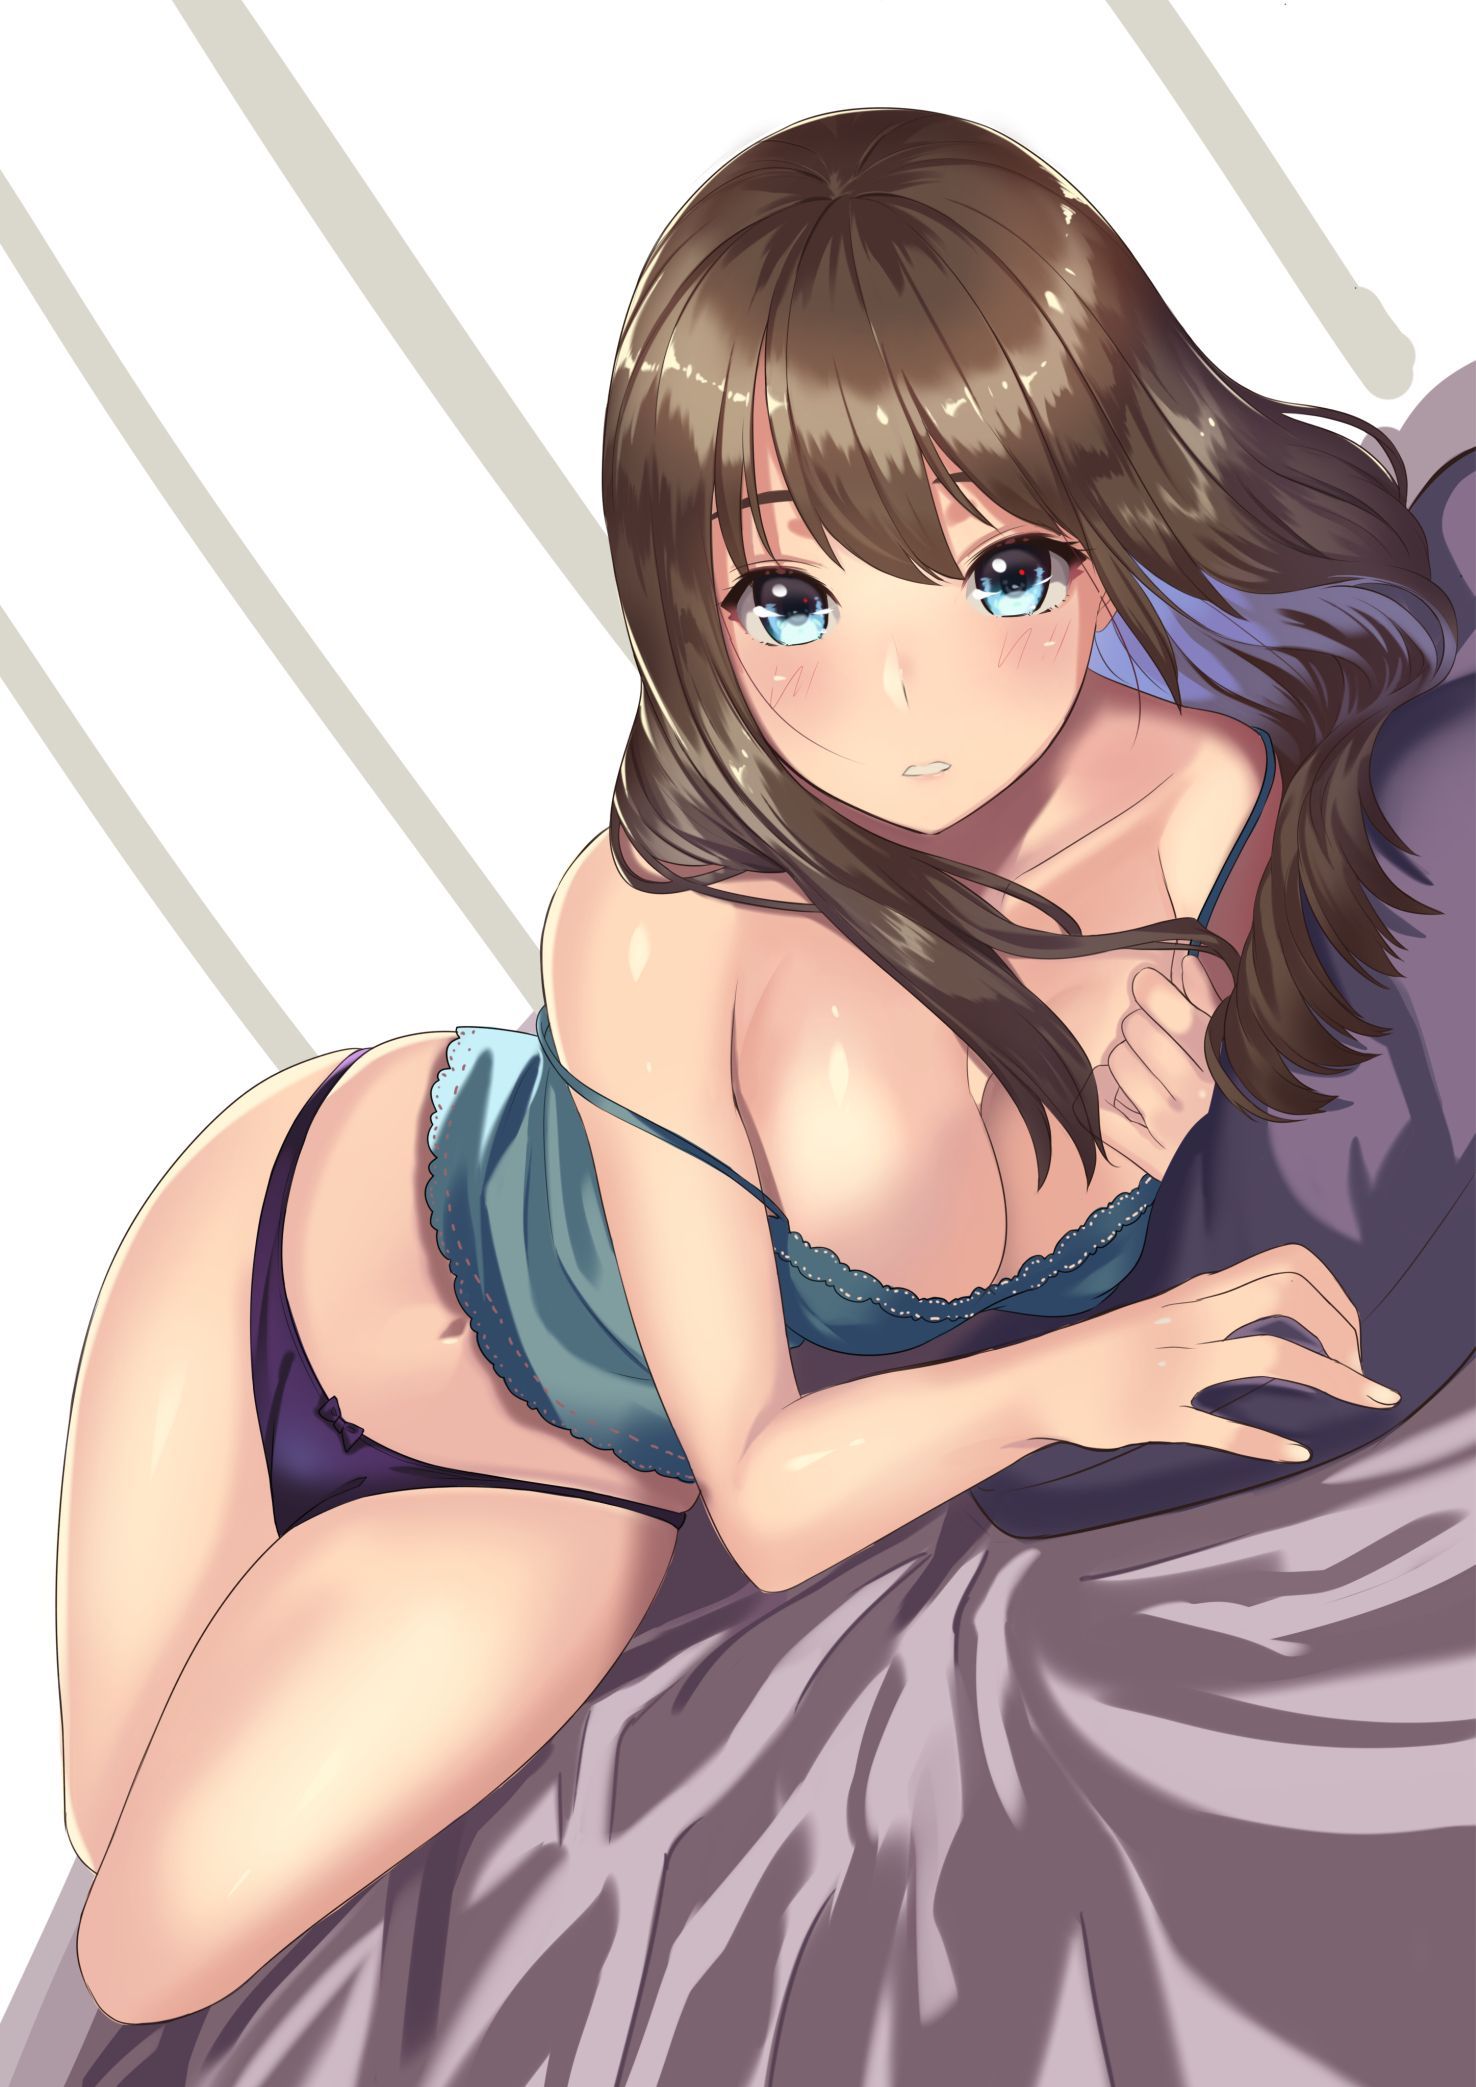 [2nd] Erotic image of a girl with a shy expression Part 69 15